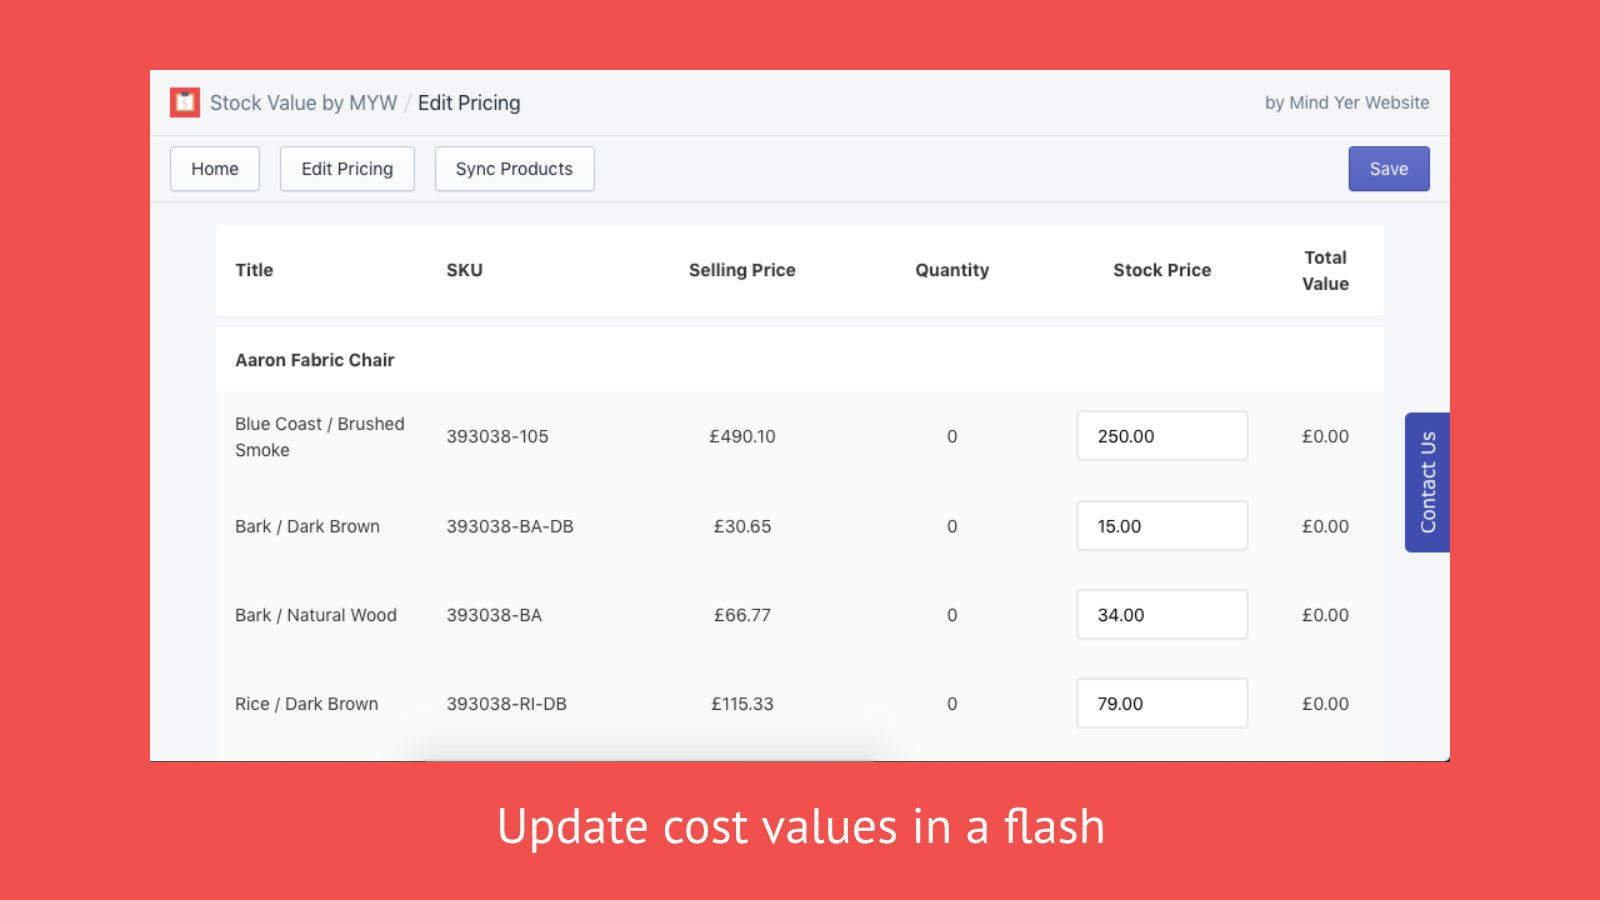 Update cost values in a flash